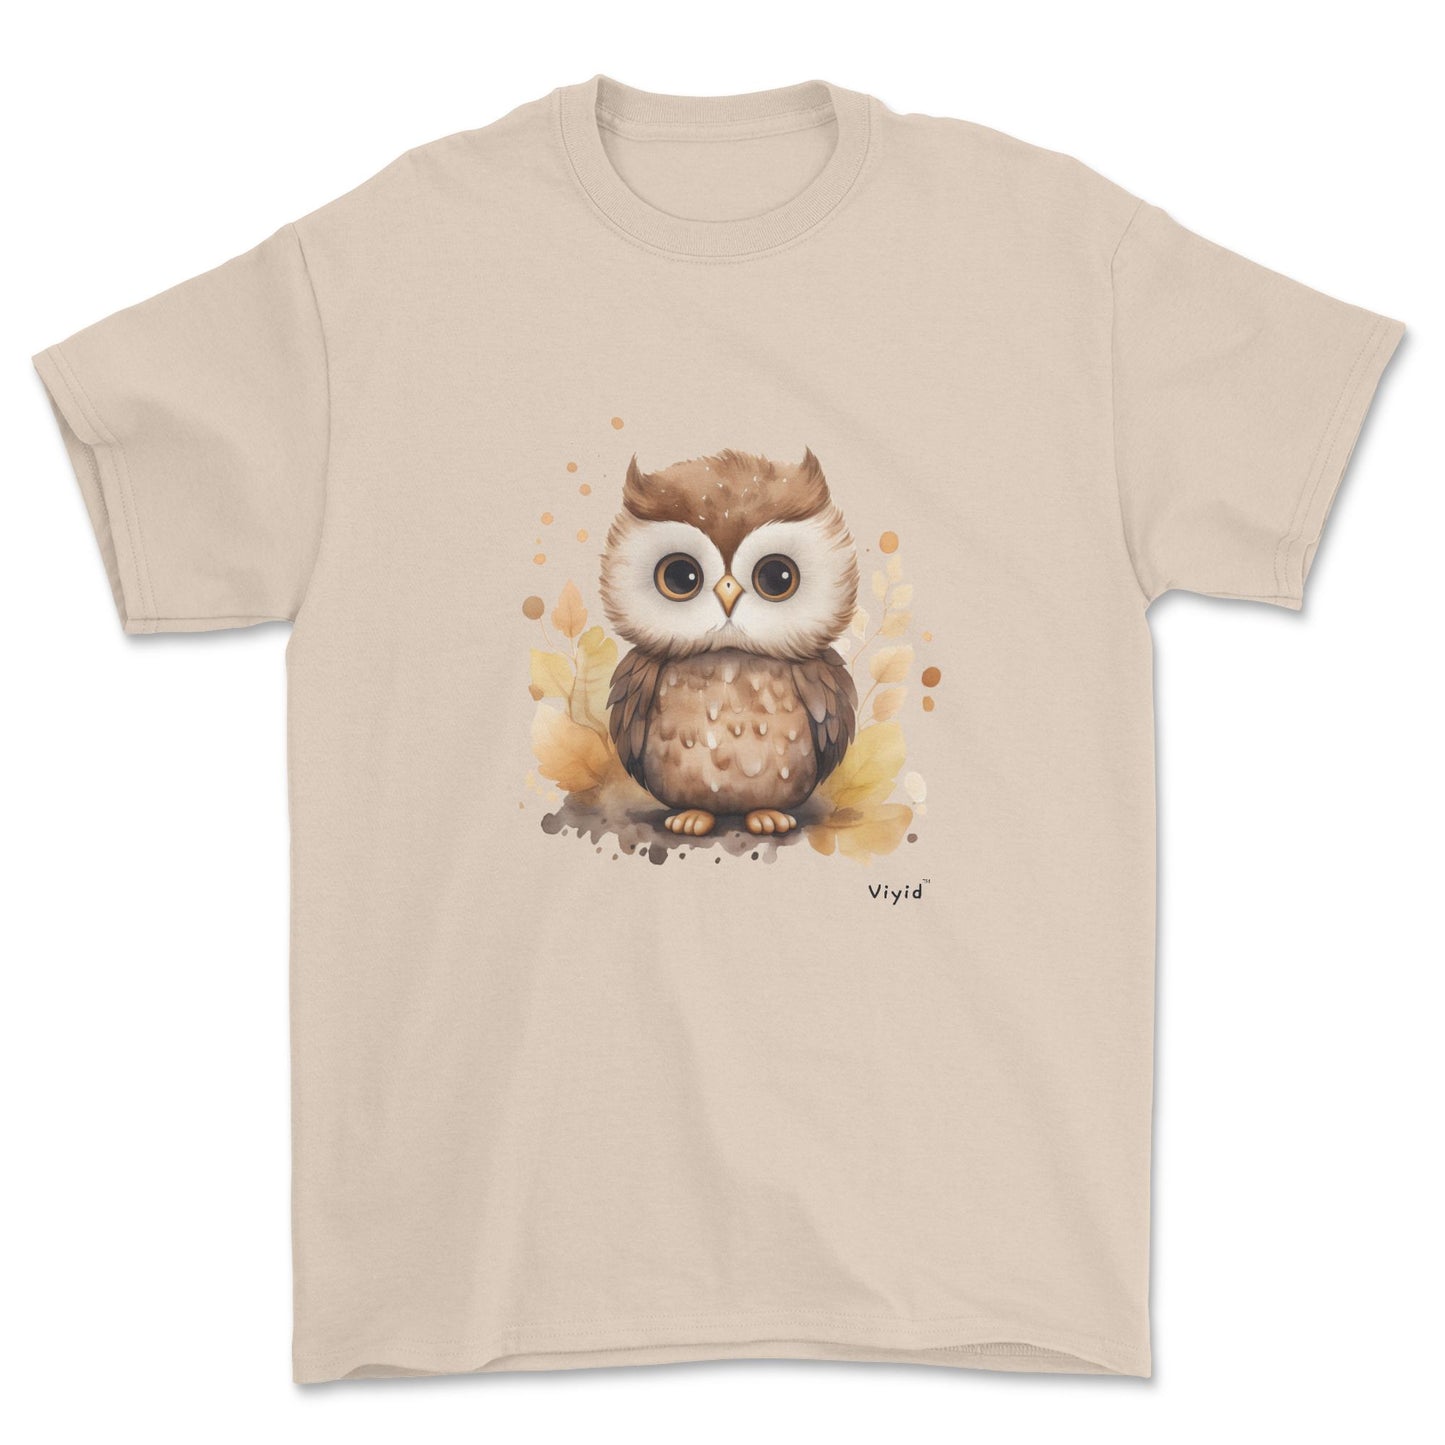 nocturnal owl adult t-shirt sand